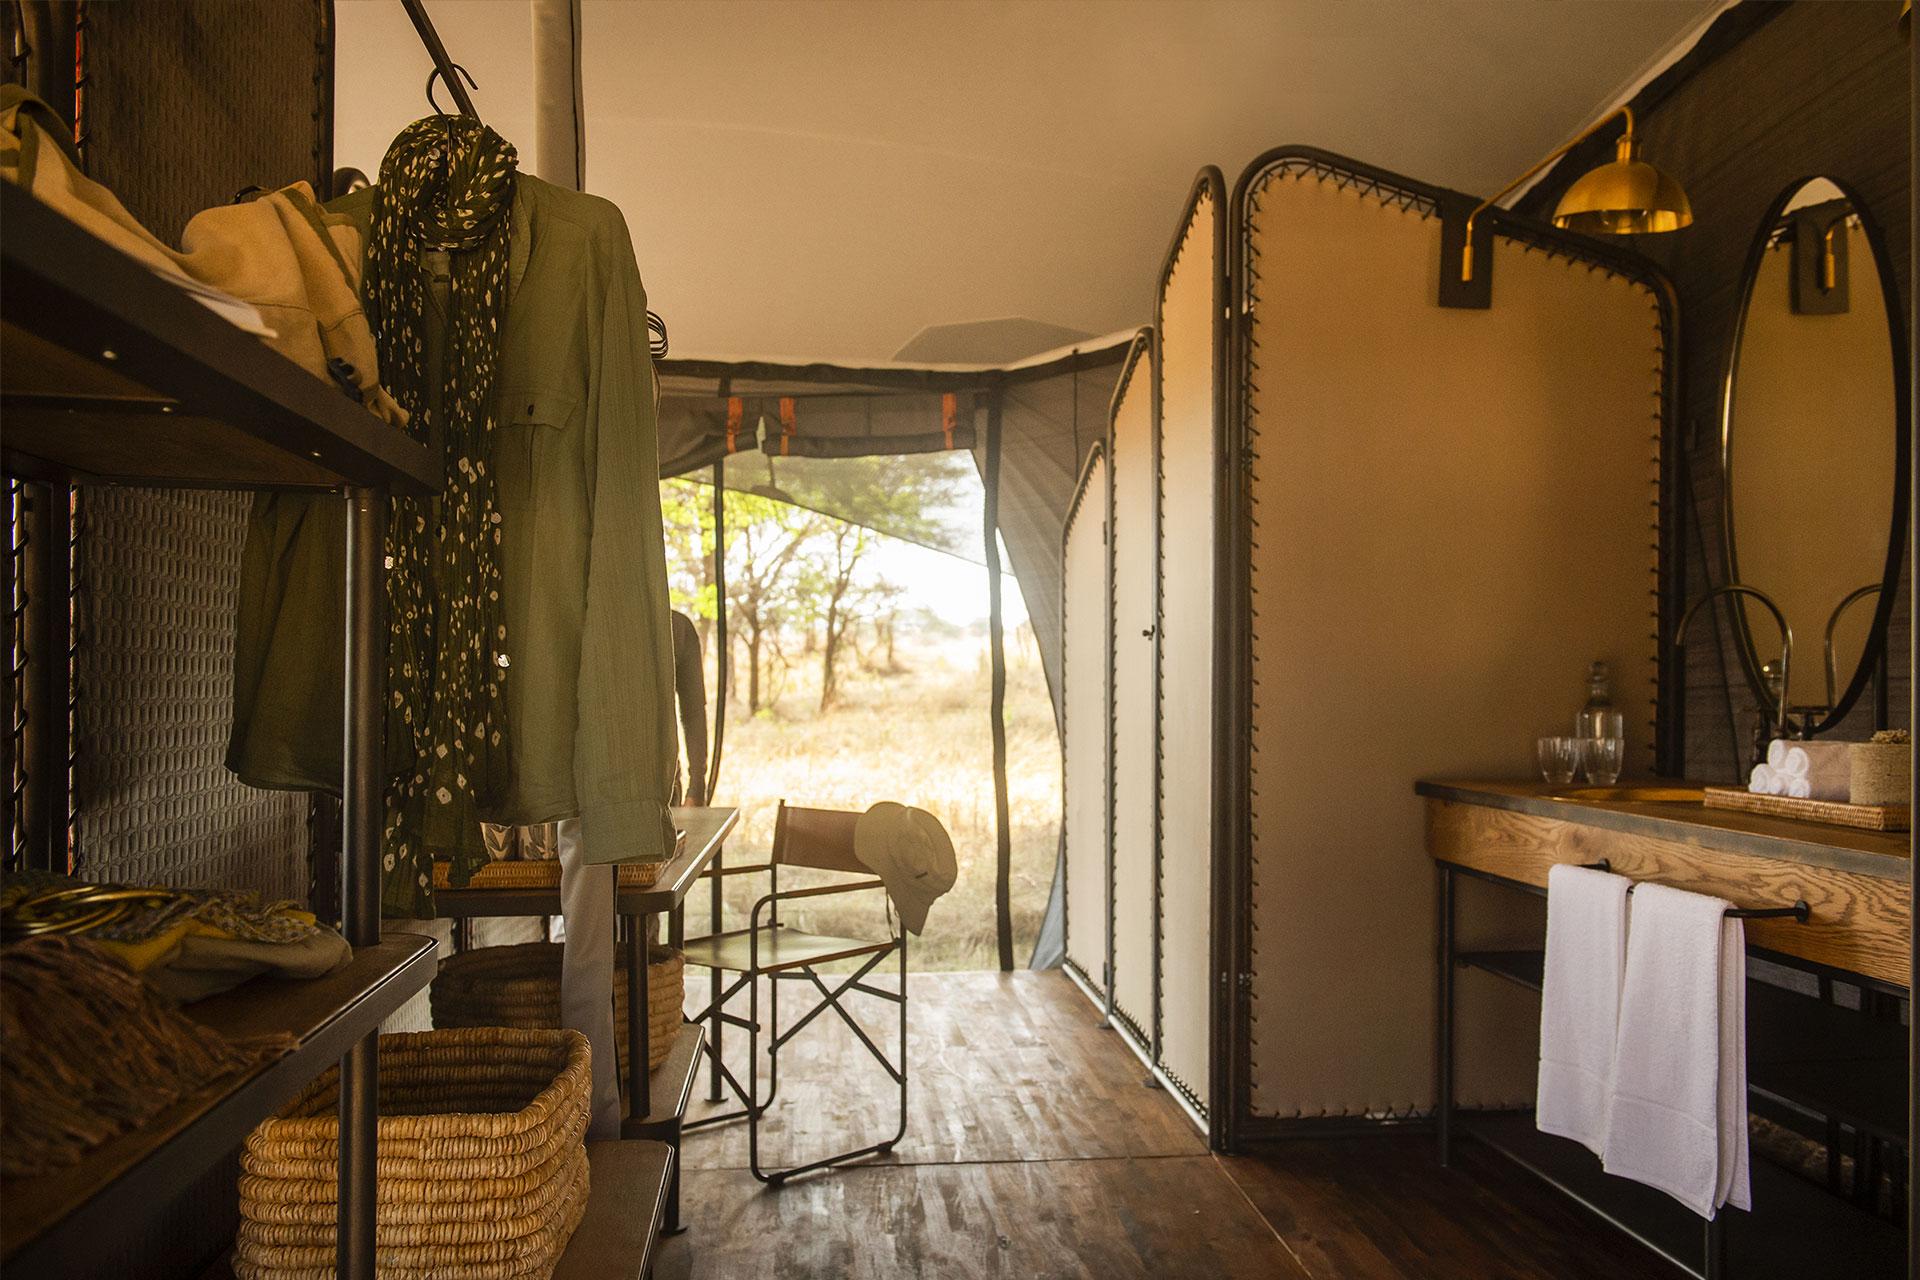 All canvas tents have en-suite bathrooms with double vanity, hot water on demand, and eco-friendly flush toilets